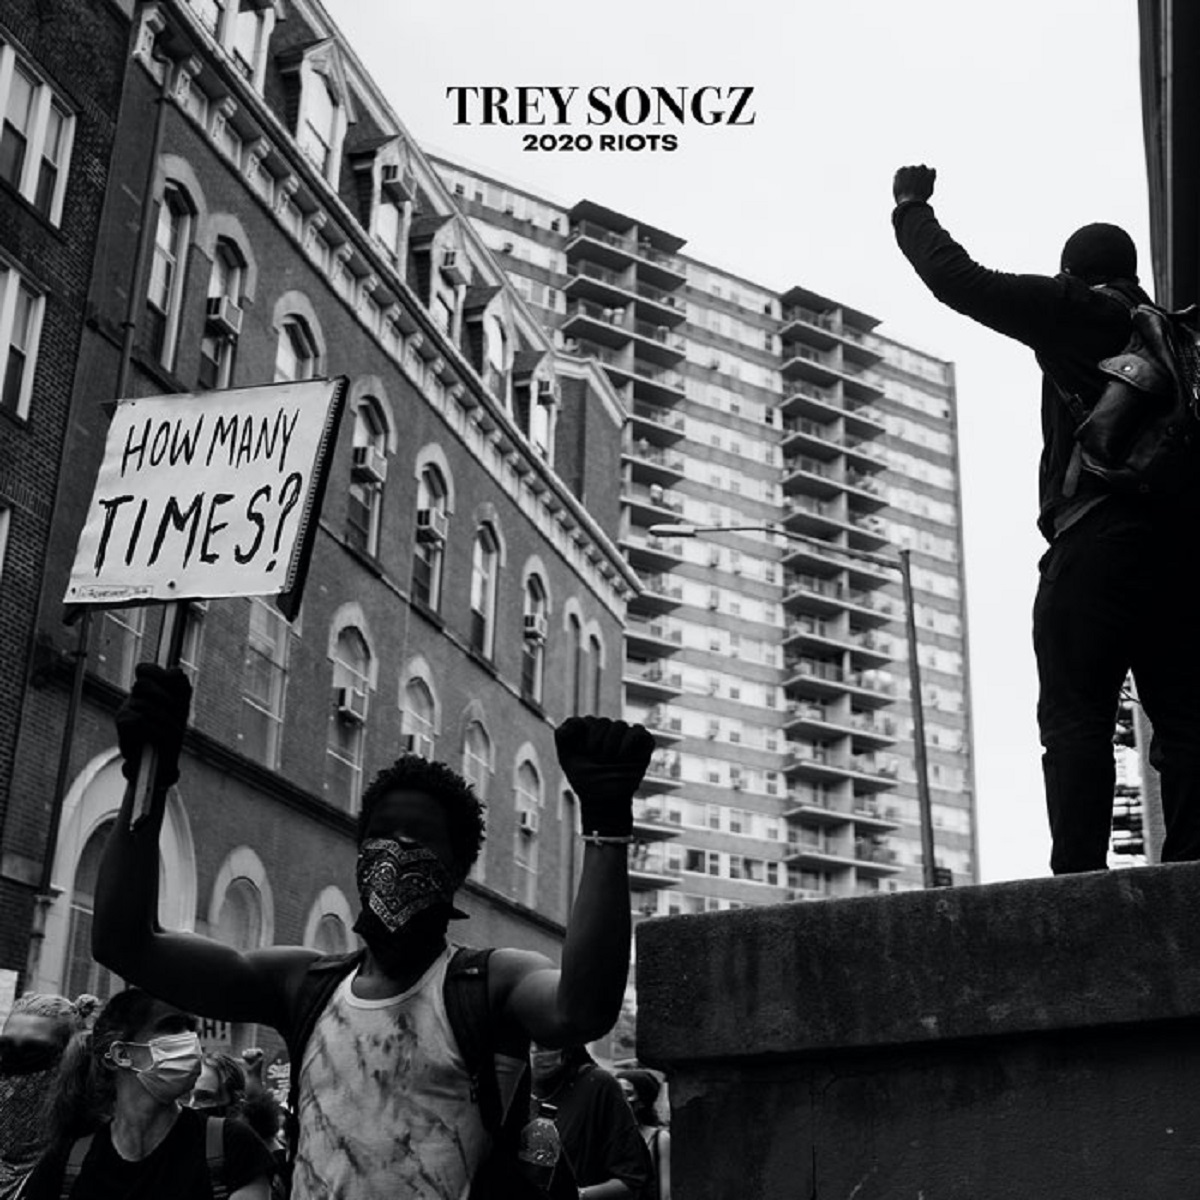 Trey Songz joins the protest, releasing his "How Many Times" single, adding to the good fight.